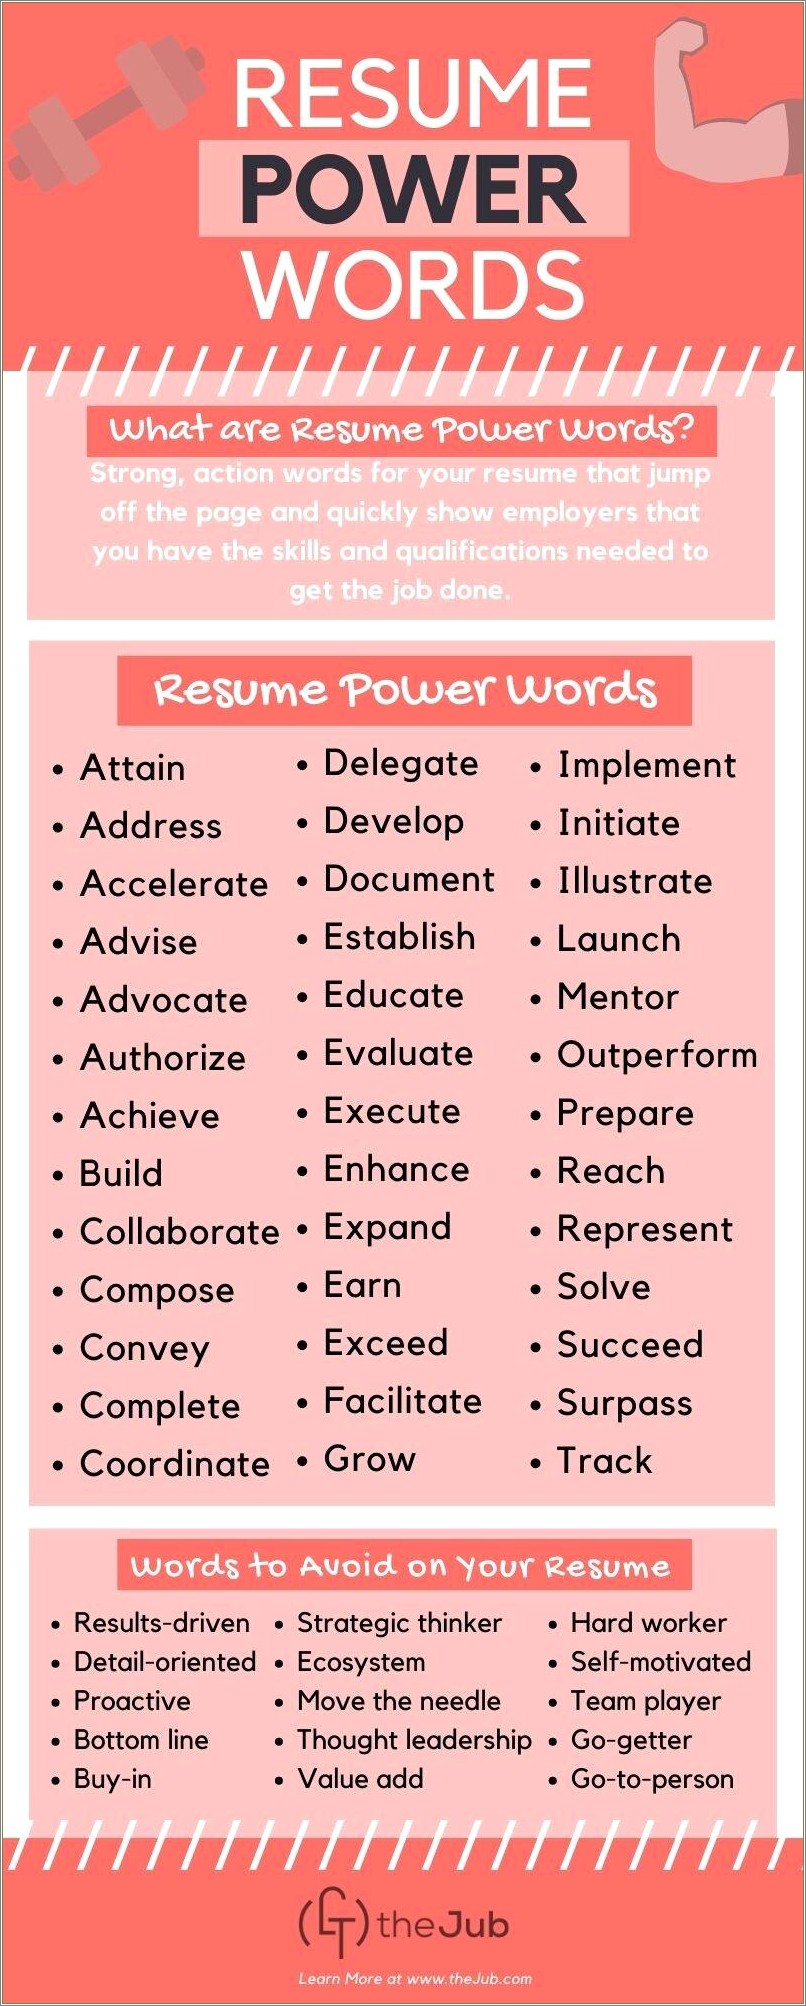 Another Word For Provided In Resume